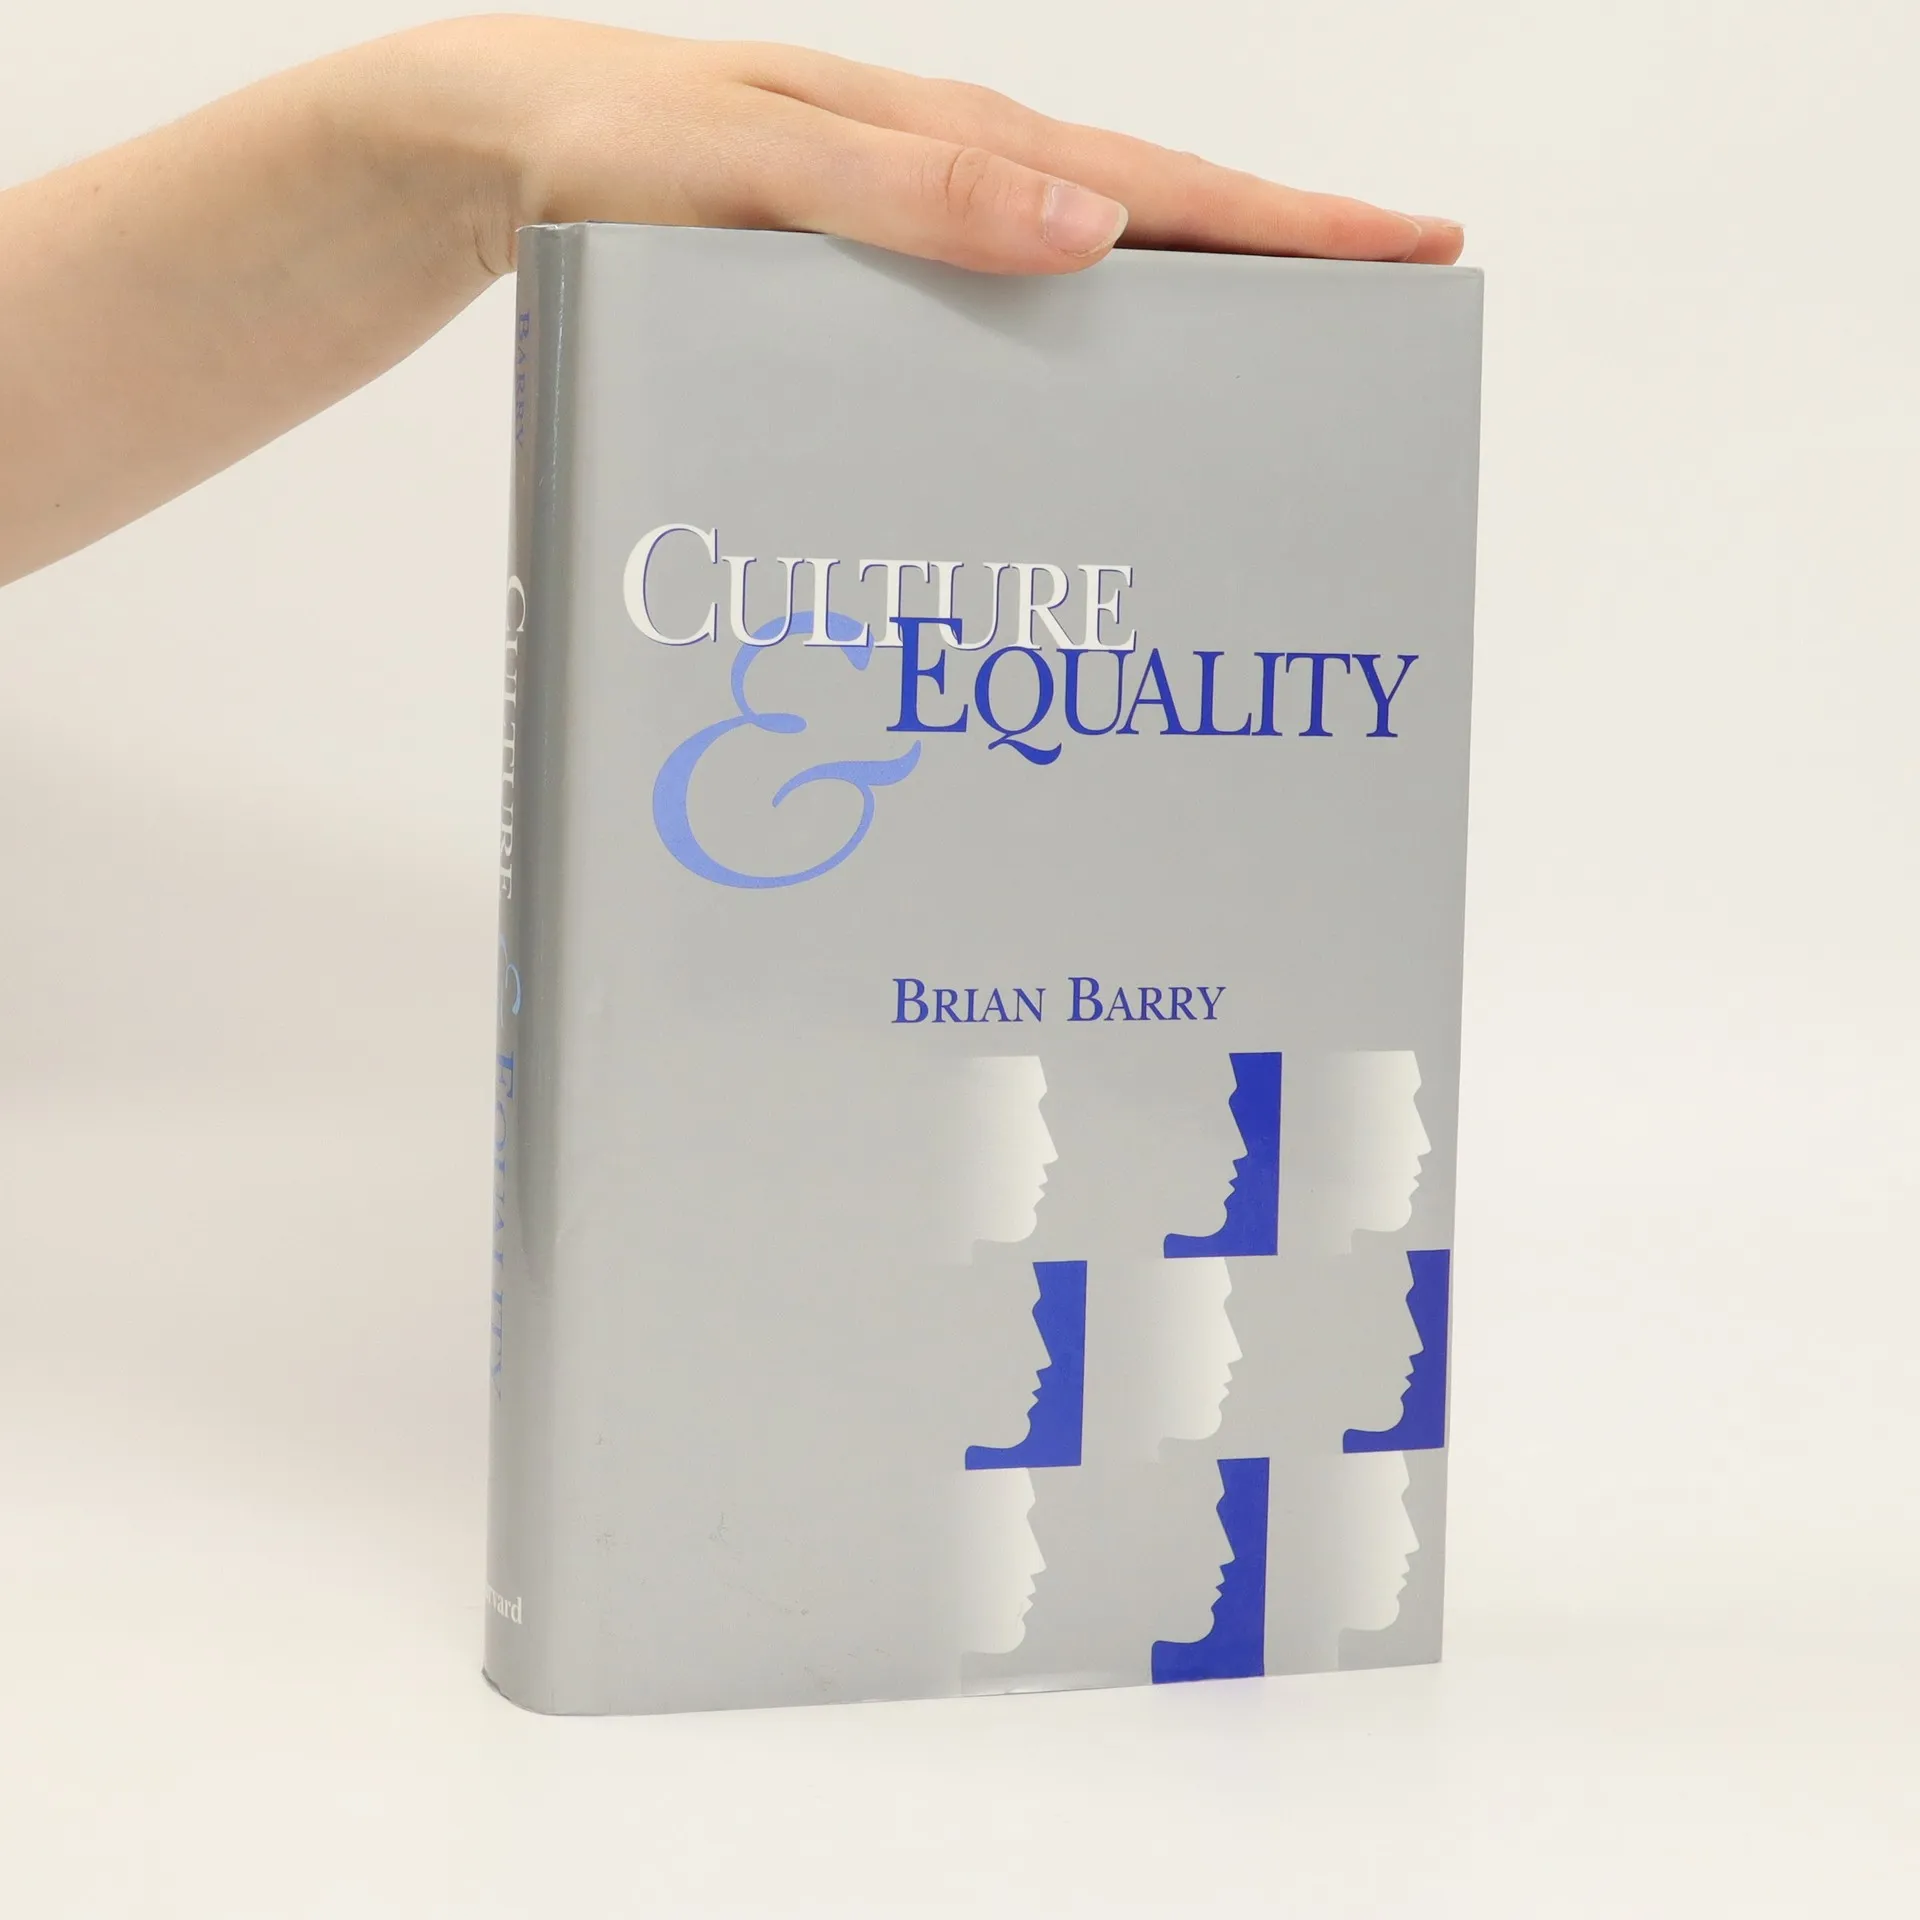 Culture equality : an egalitarian critique of multiculturalism Barry, Brian - knihobot.sk